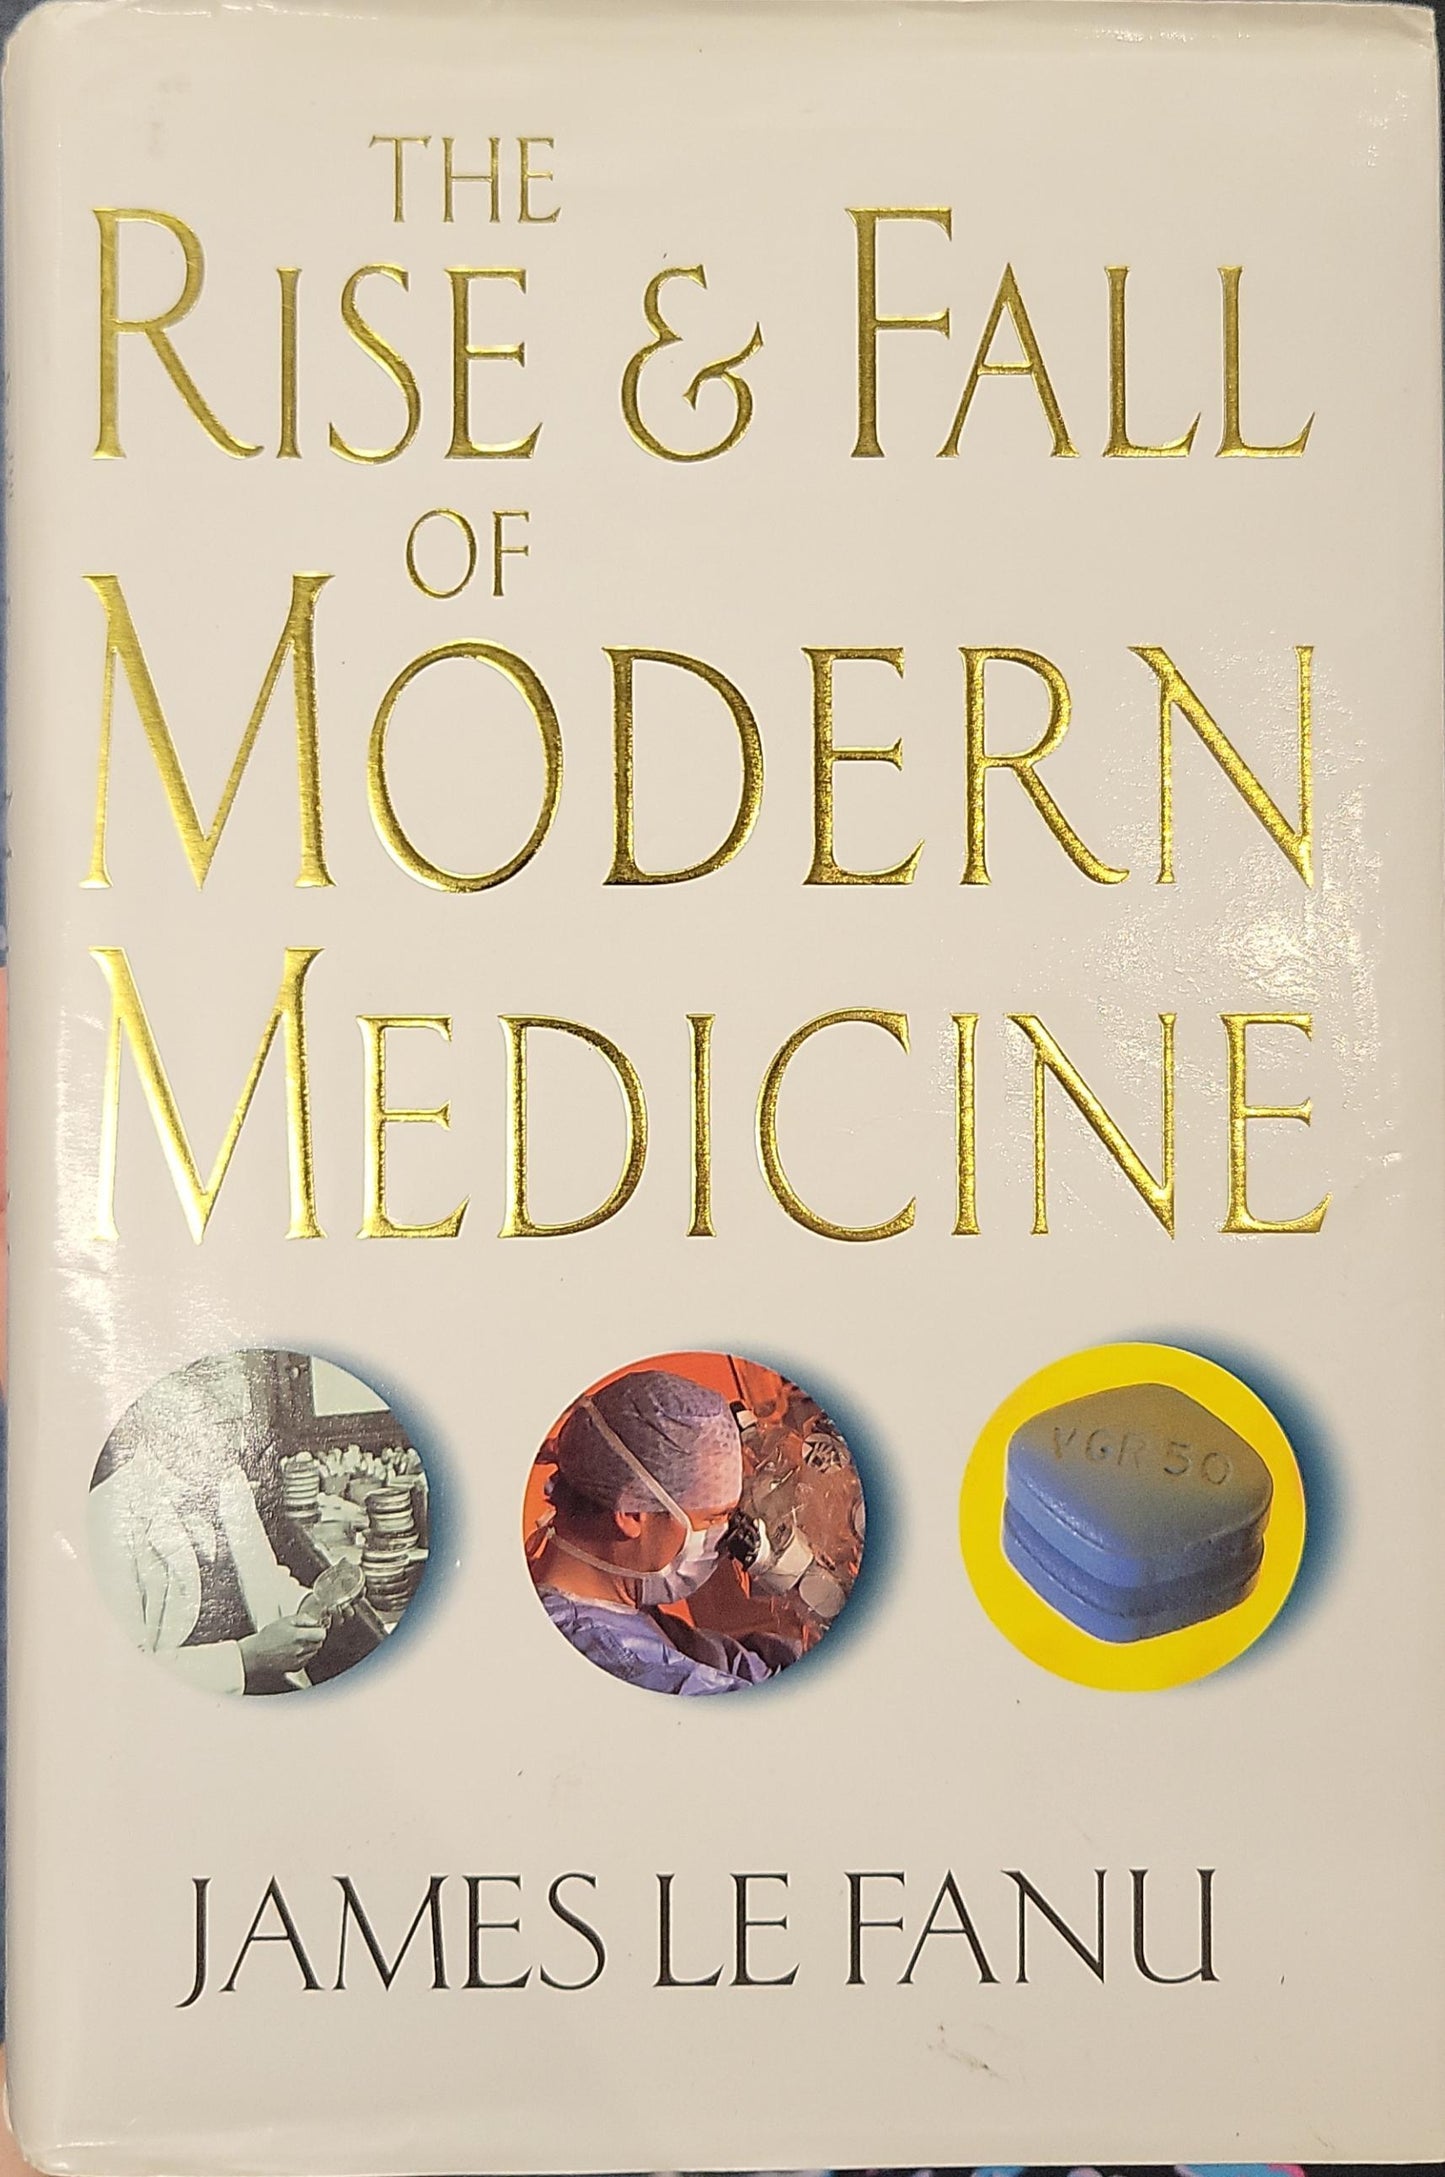 The Rise & Fall of Modern Medicine, by James Le Fanu